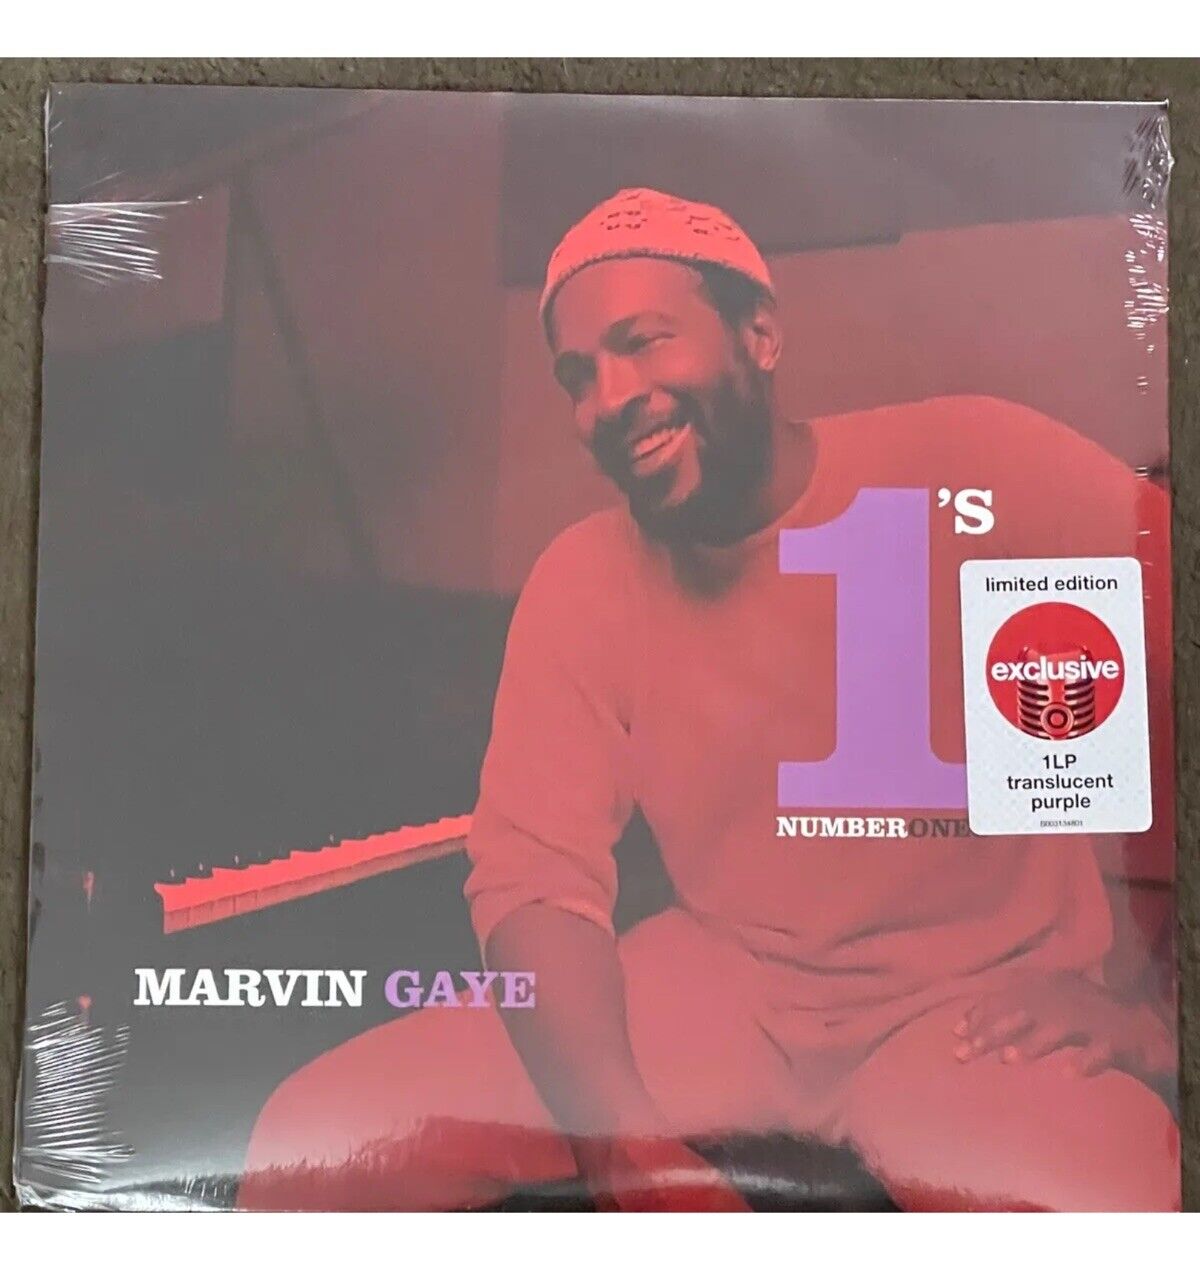 Marvin Gaye- Number 1s Ones Limited Edition, Purple Vinyl LP Record NEW SEALED 